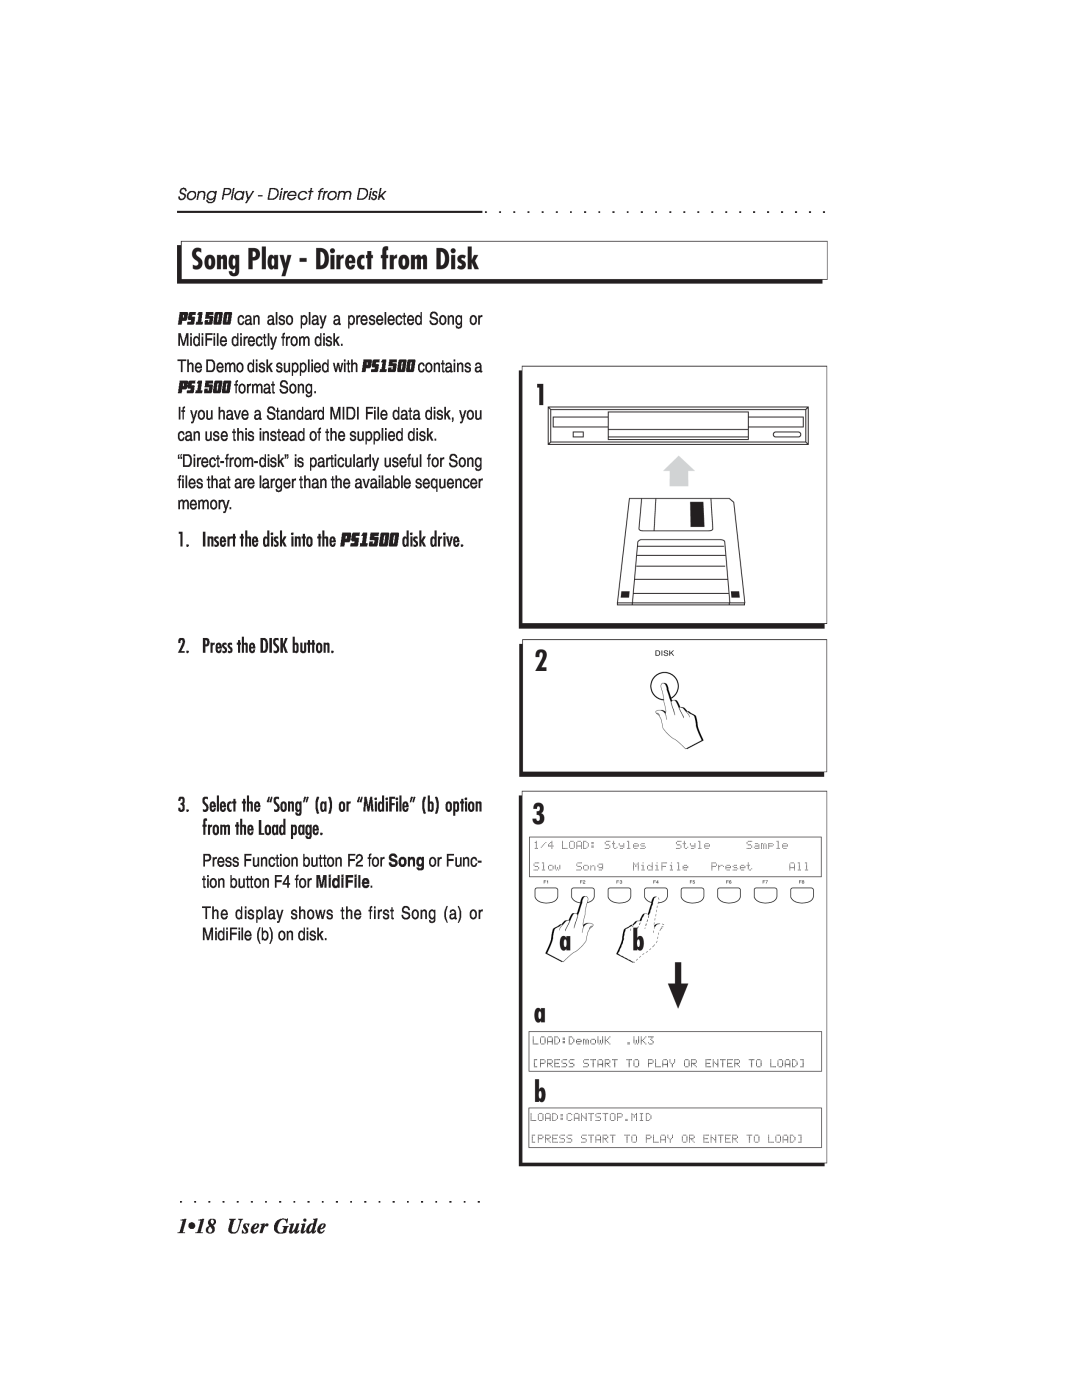 IBM PS1500 owner manual Song Play - Direct from Disk, a b a, 1 18 User Guide, Press the DISK button 